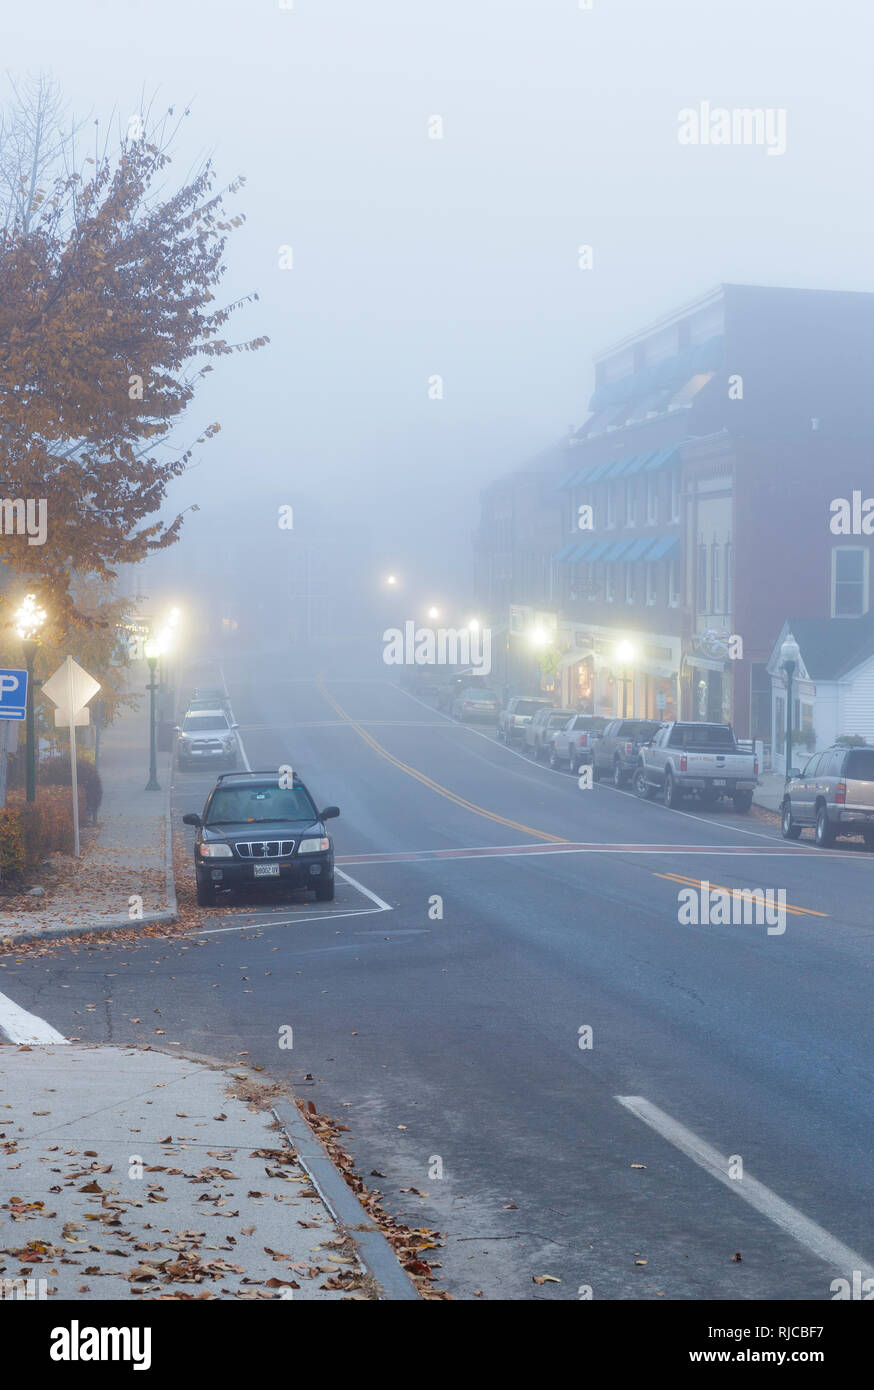 Main Street (Route 1) in downtown Camden, Maine USA on a foggy autumn morning. The town of Camden is located on the coast of Maine. Stock Photo